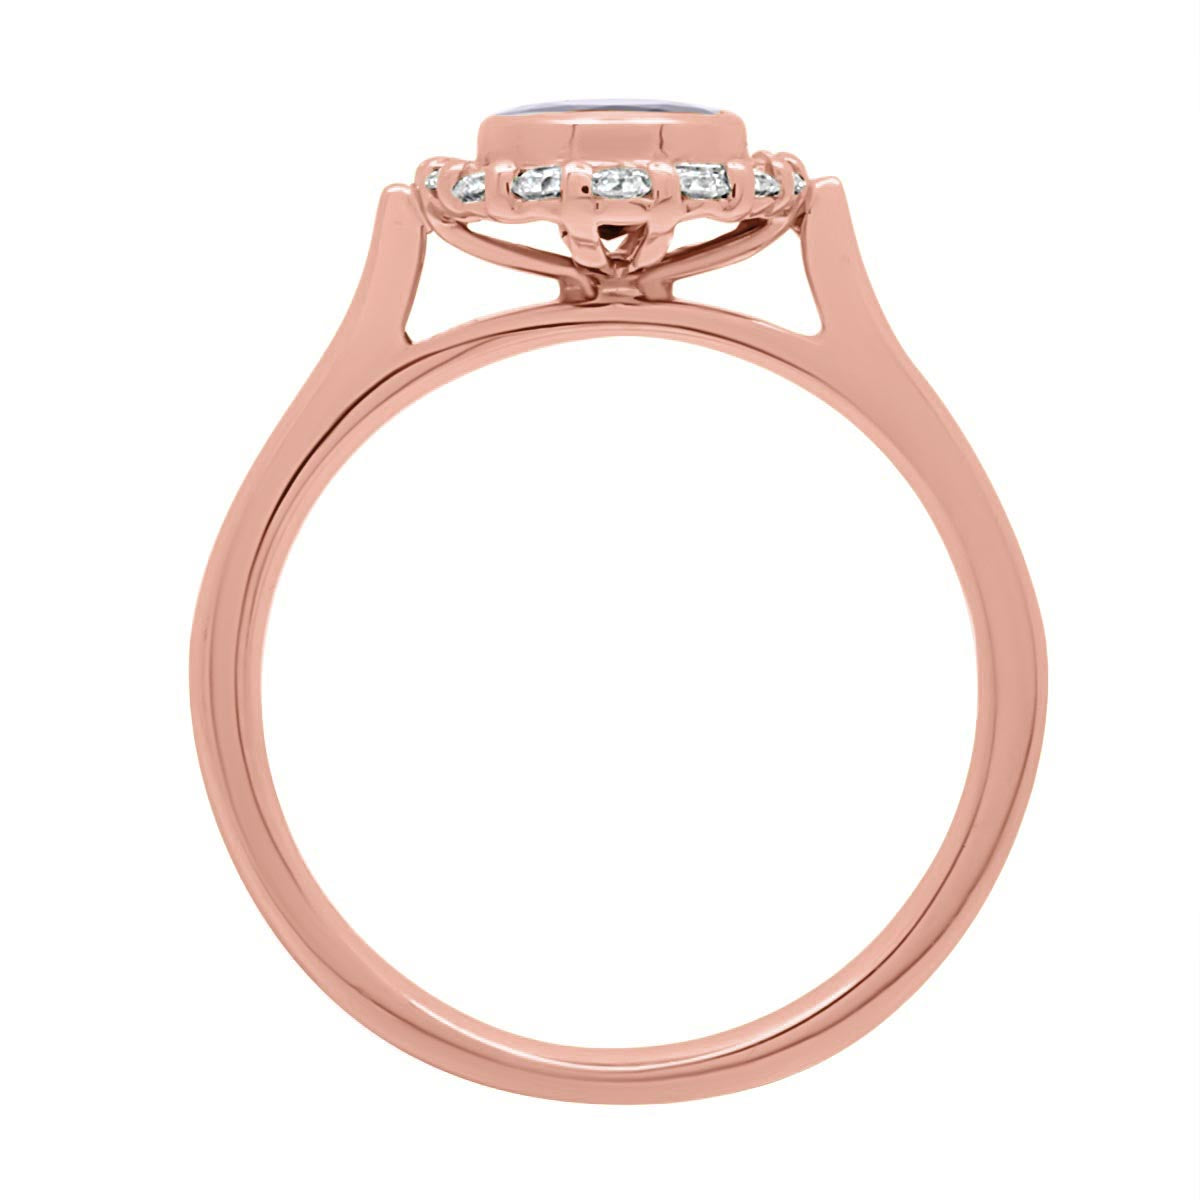 Sapphire Bezel Engagement Ring in rose gold and upright